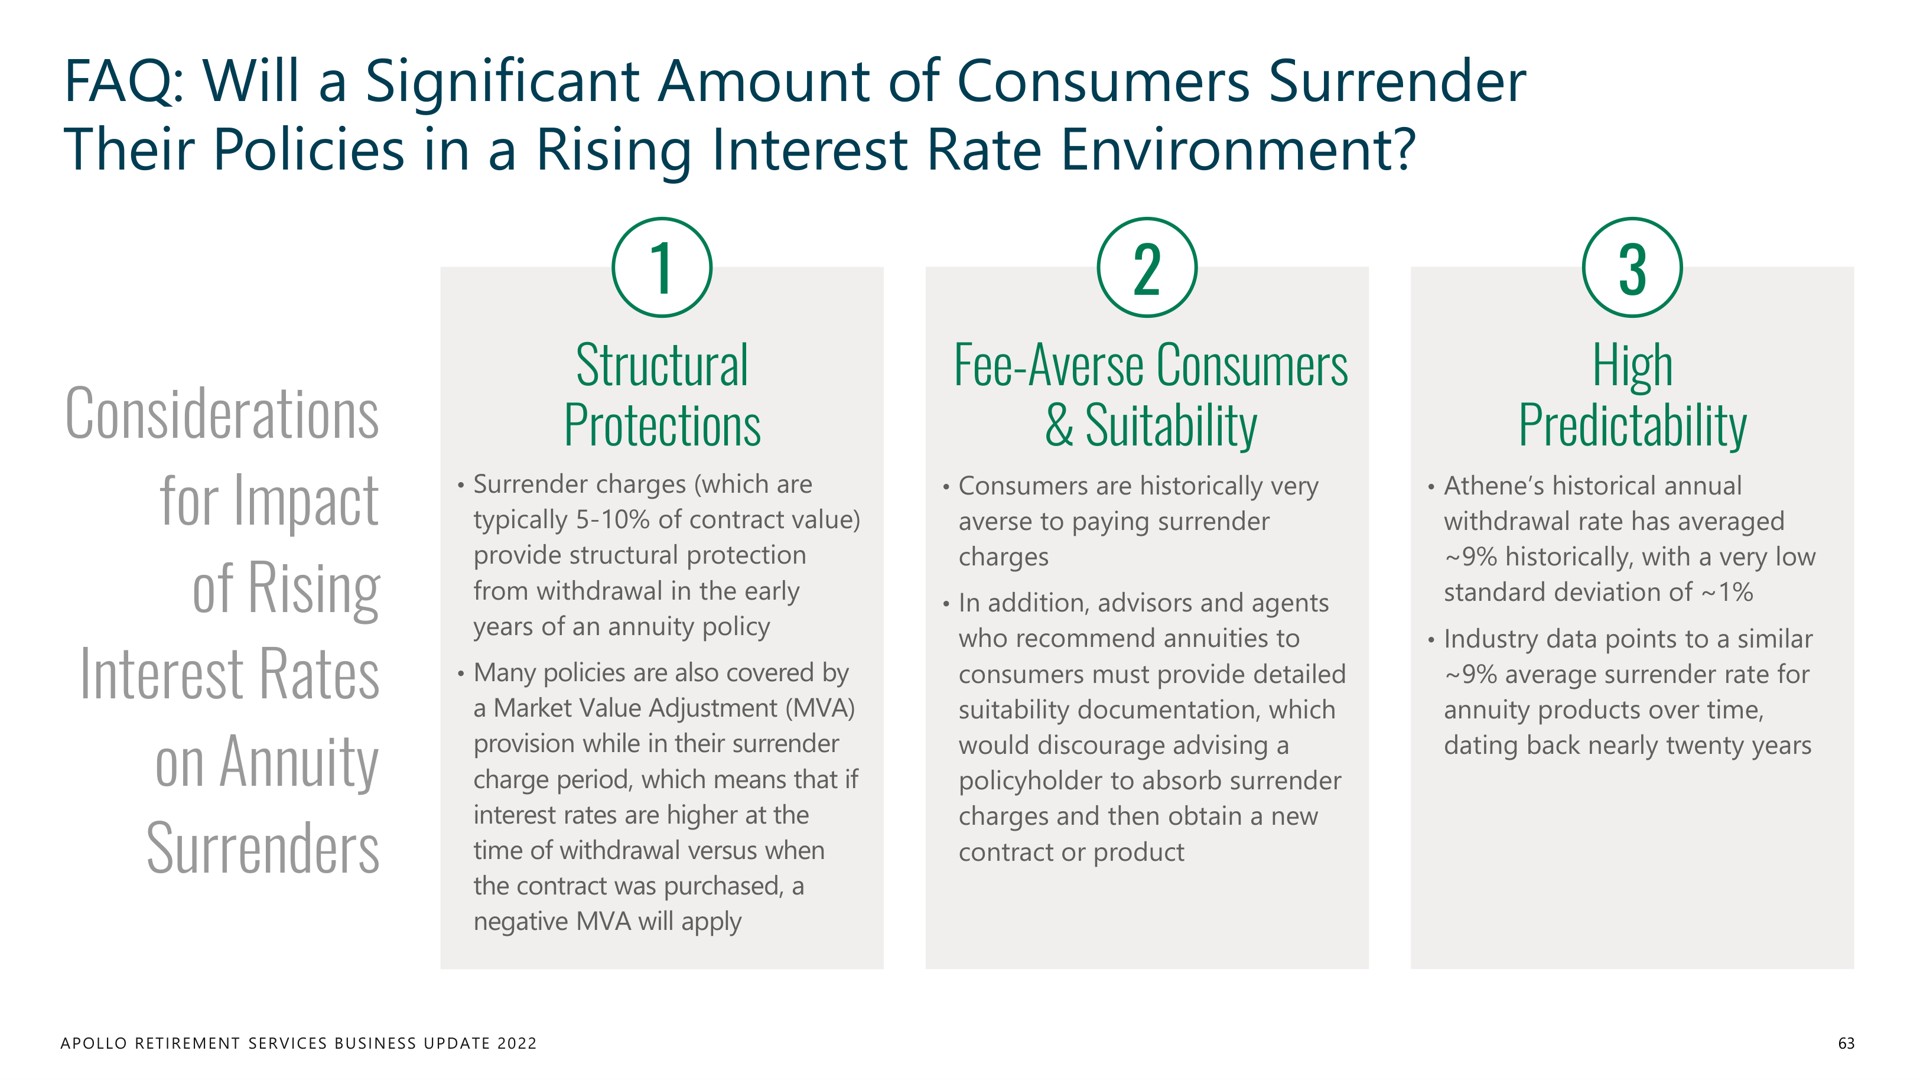 will a significant amount of consumers surrender their policies in a rising interest rate environment considerations for impact of rising interest rates on annuity surrenders structural protections fee averse consumers suitability high predictability | Apollo Global Management